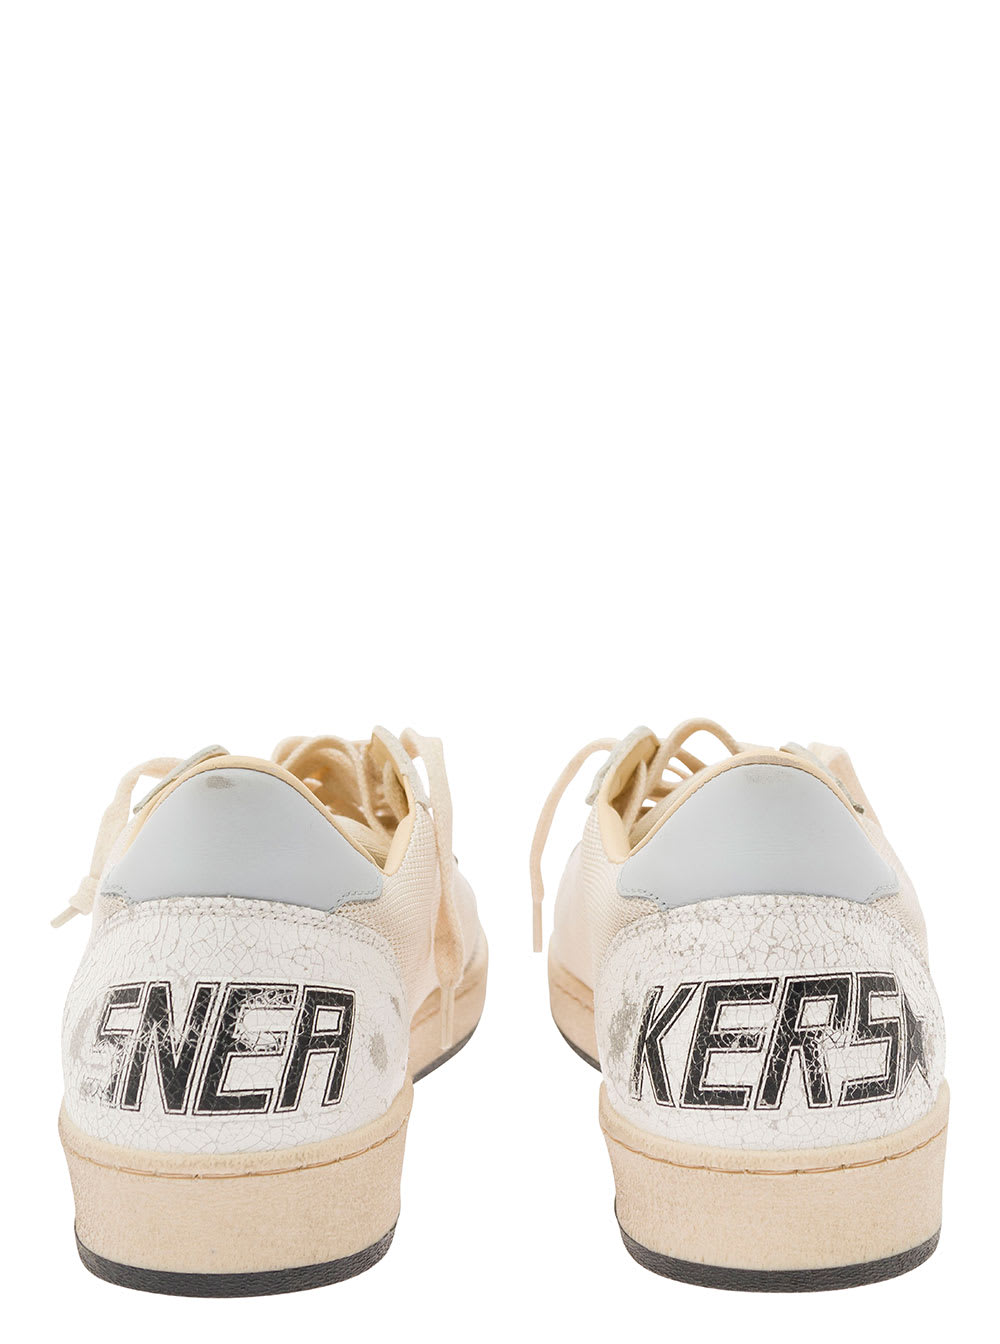 Shop Golden Goose Ball Star Net Upper Crack Leather Toe And Spur Nylon Tongue Leather Star And Heel In White